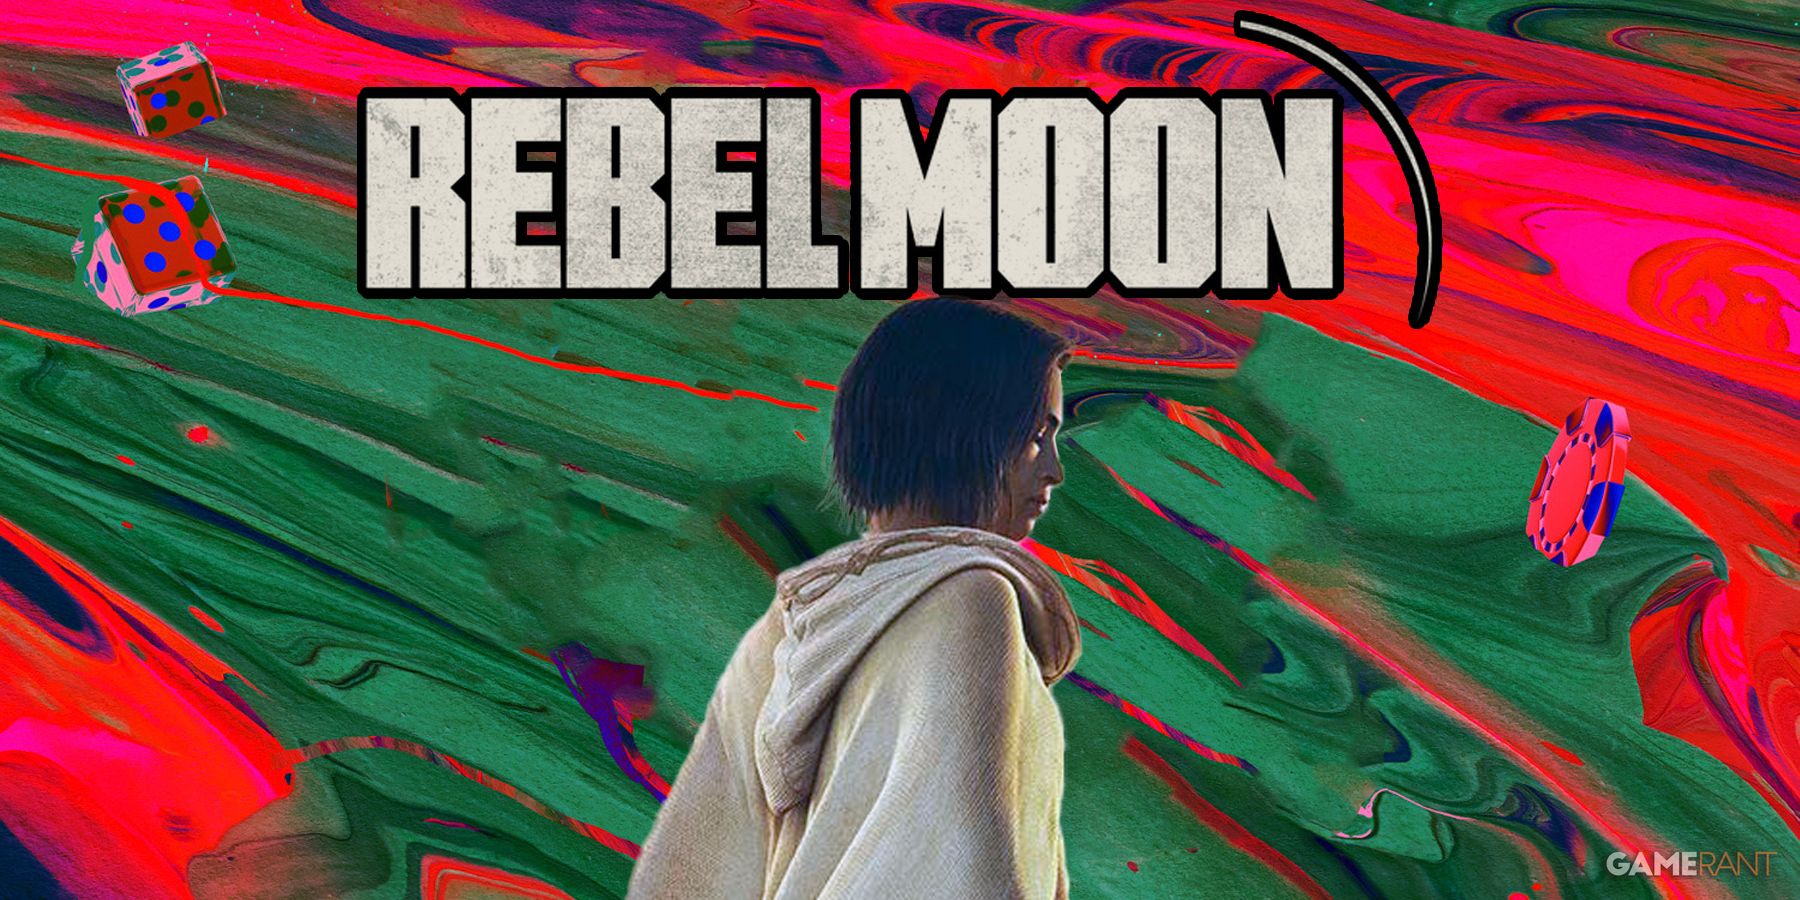 Zack Snyder's 'Rebel Moon - Part One' Sets Limited Theatrical Release